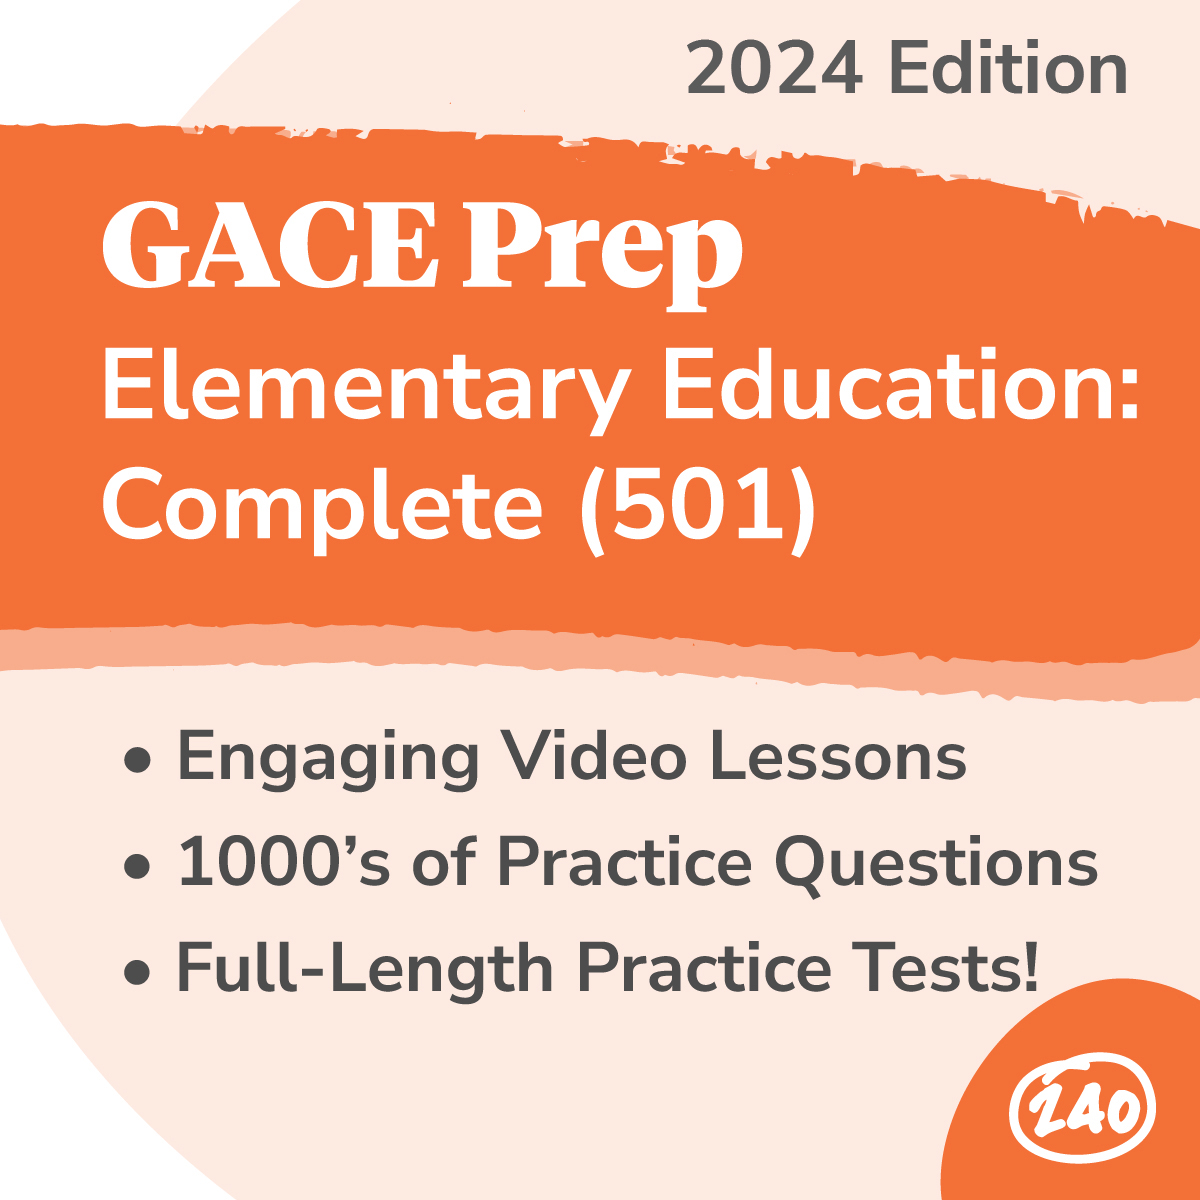 Additional Resources for the GACE Elementary Education Test